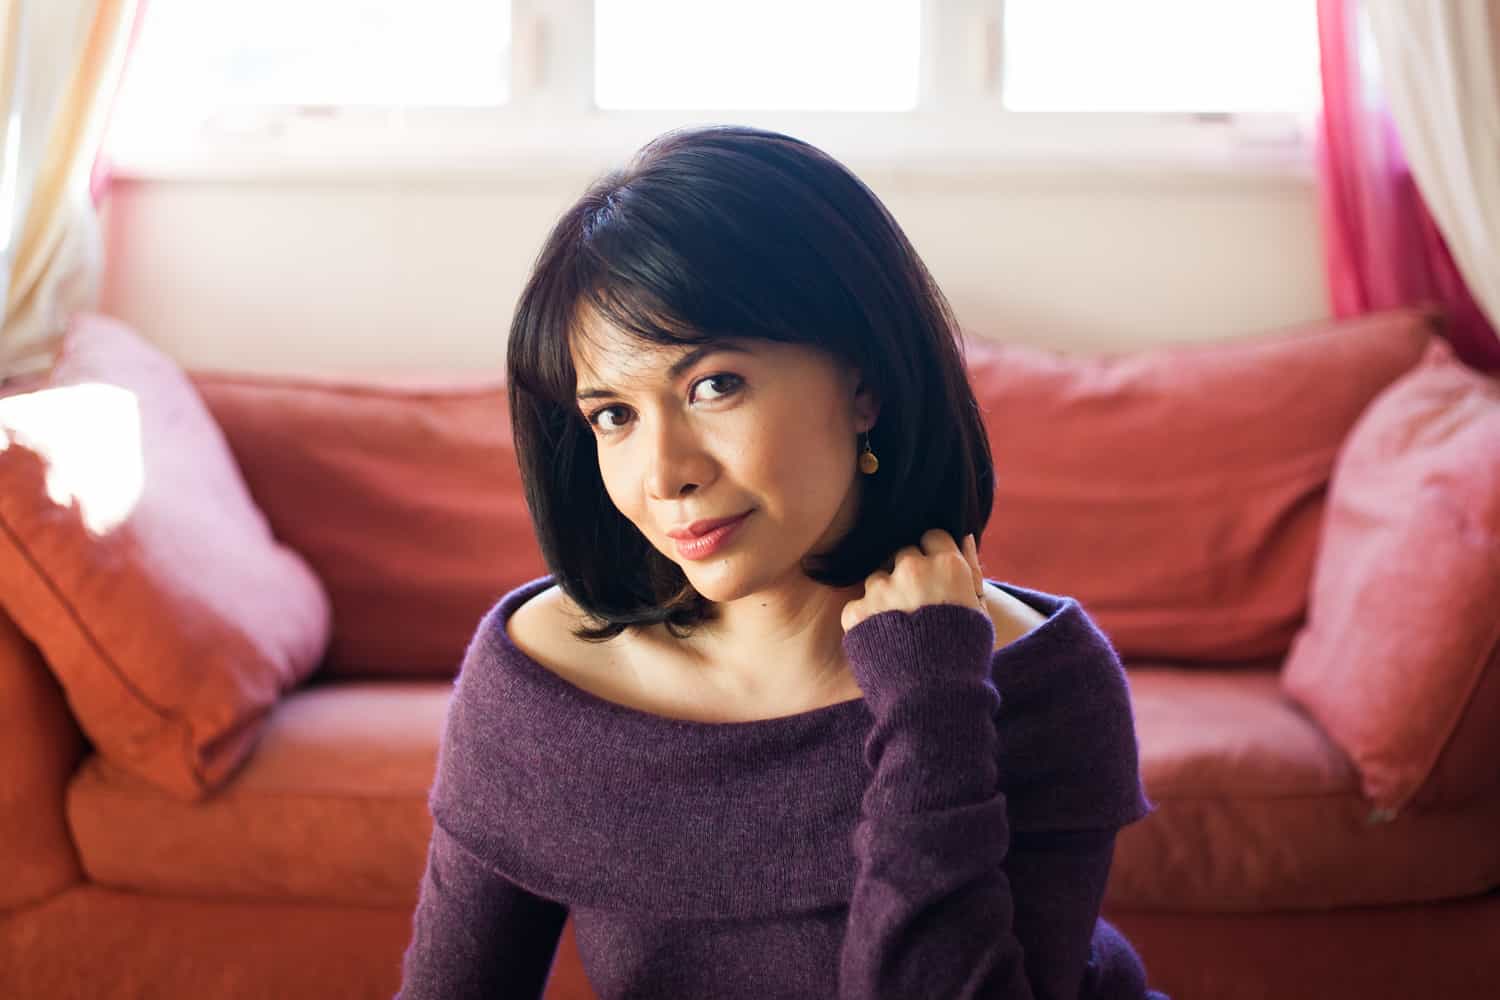 Woman with short black hair wearing purple sweater for an article on how to look slimmer in photos